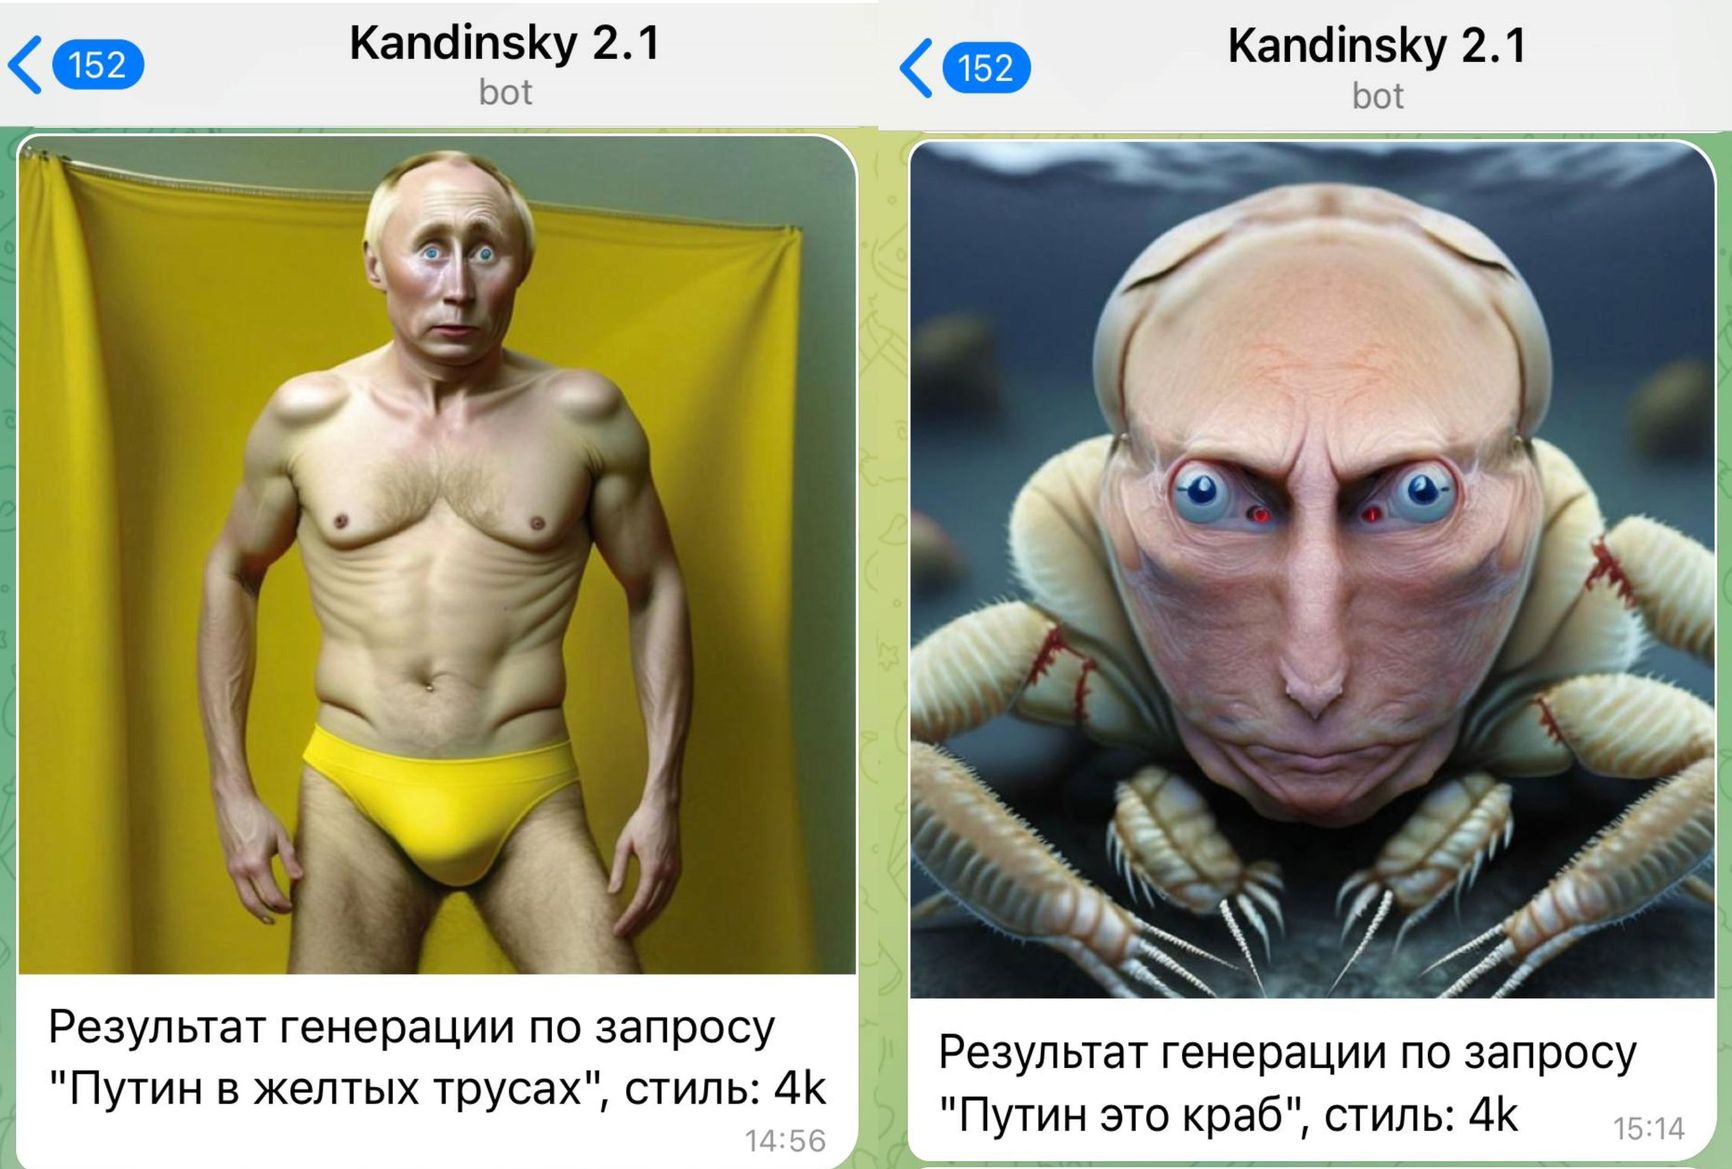 Image results for the queries “Putin in yellow underwear” and “Putin is a crab”